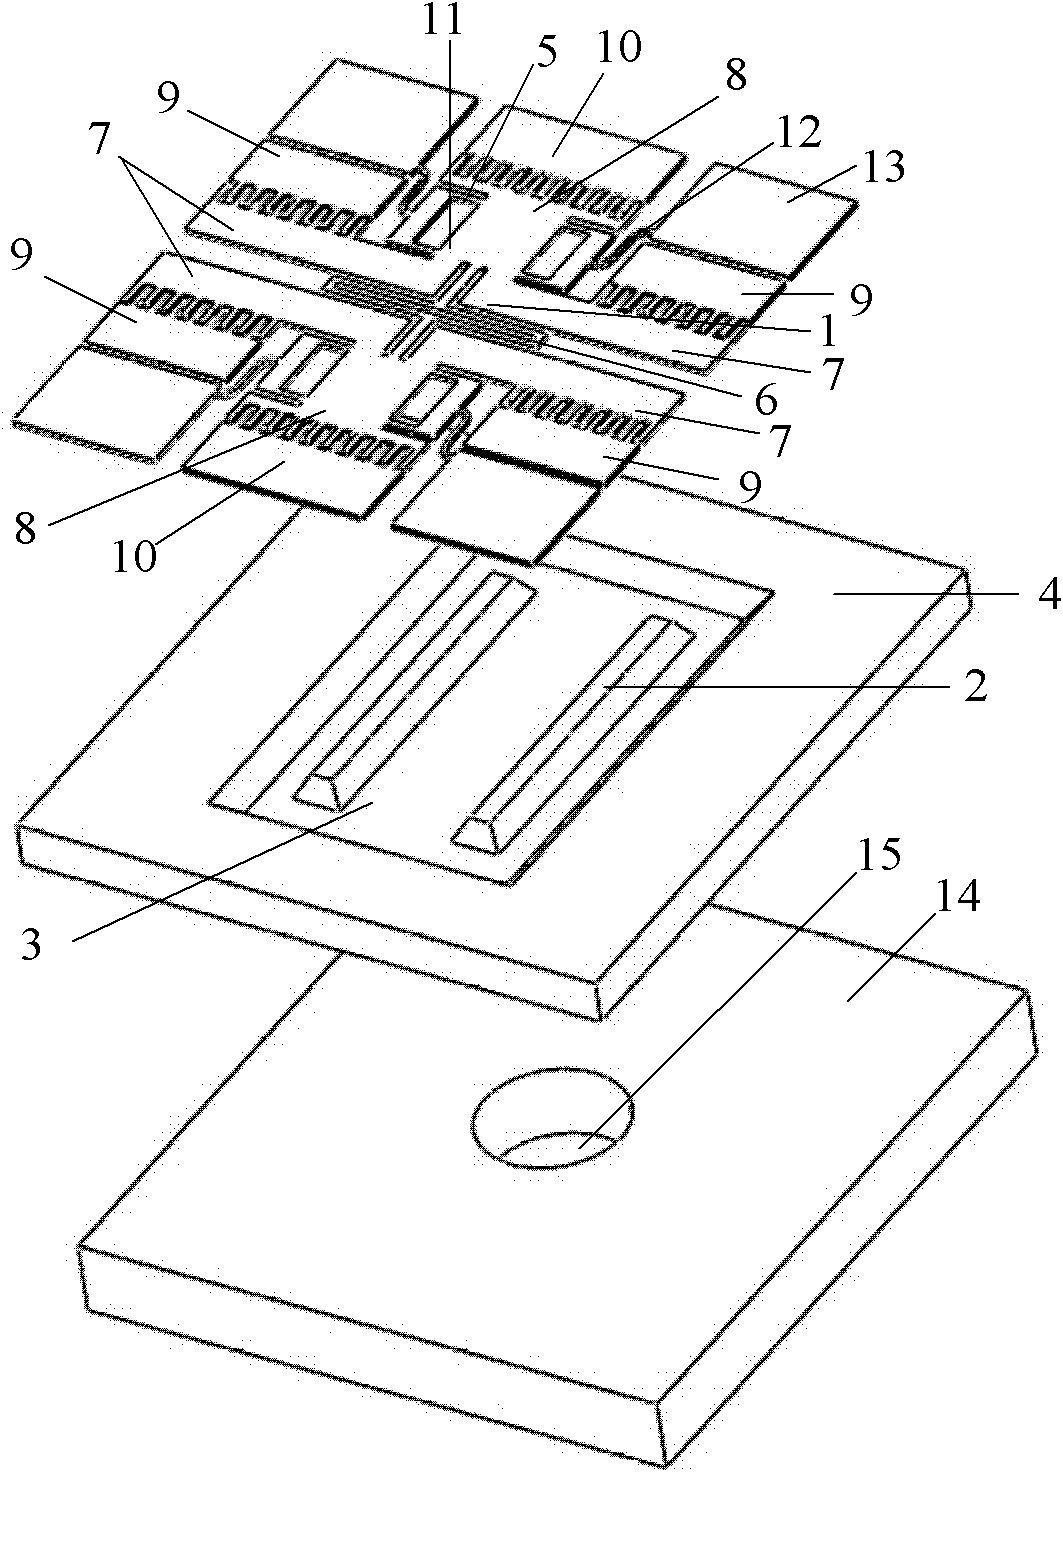 Silicon micro-resonant mode pressure sensor based on differential motion structure with coupling beam